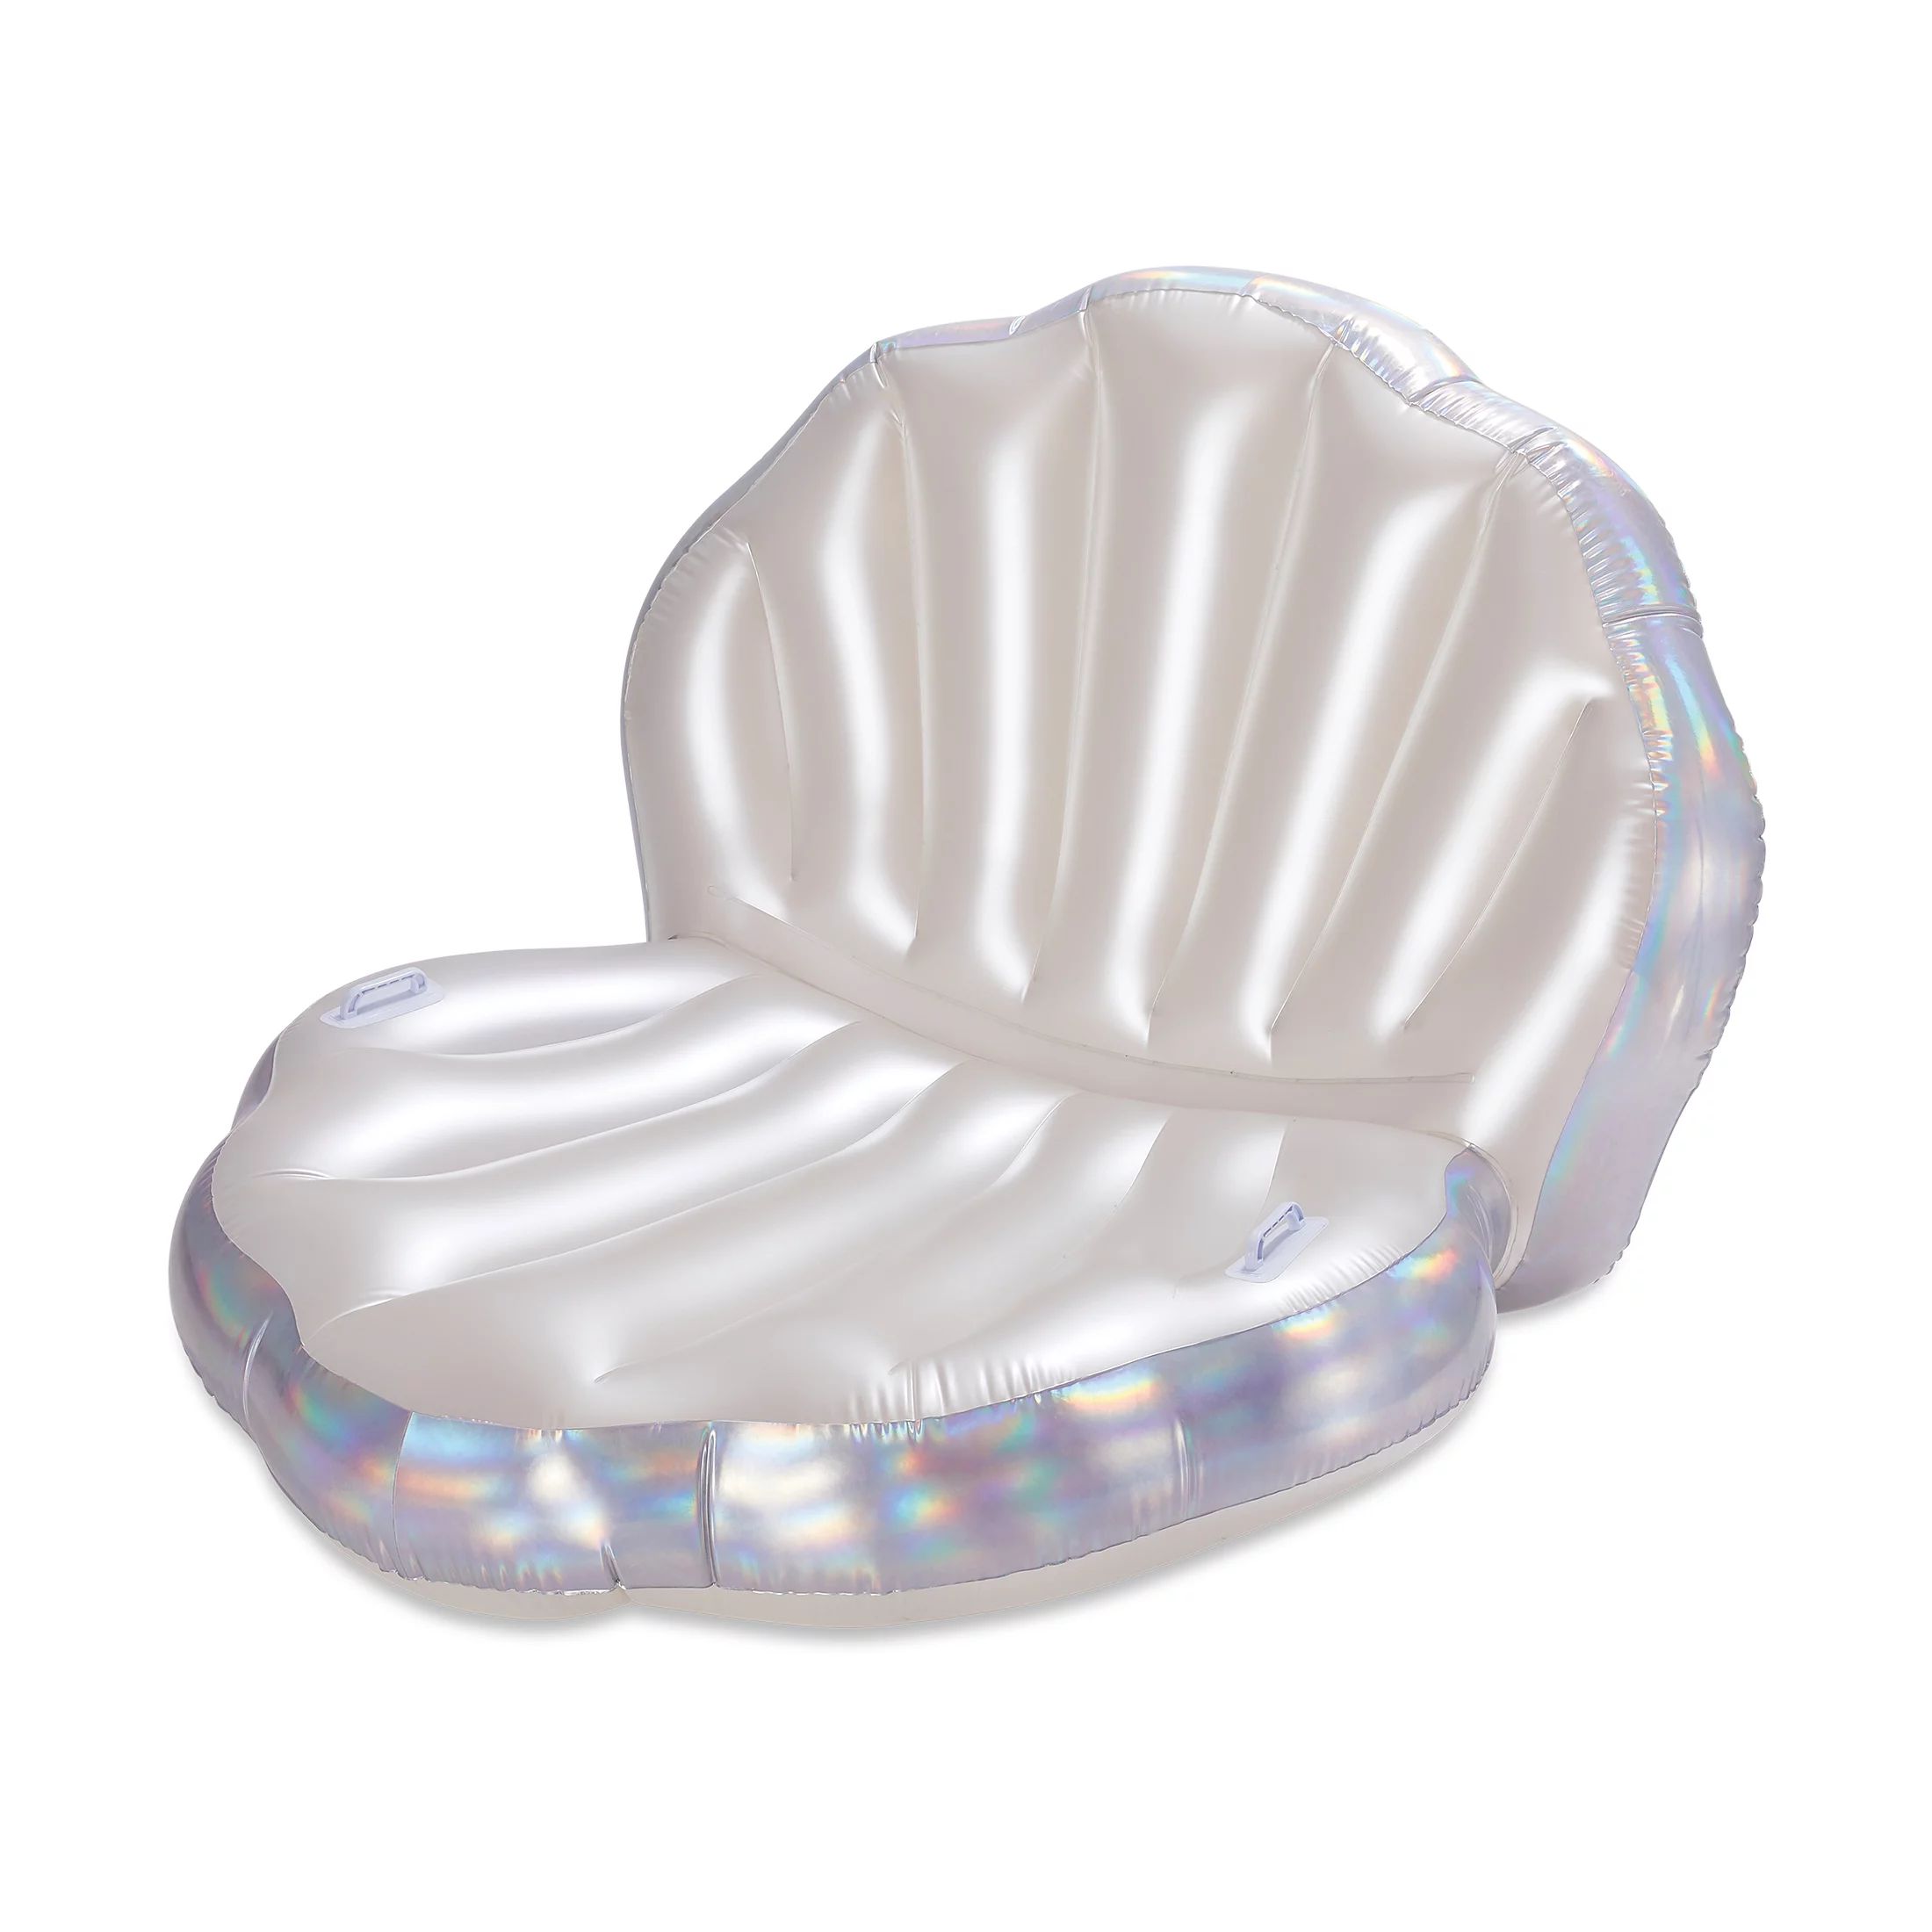 Play Day Inflatable Holographic Seashell Pool Float, Holographic Silver, for Adults, Unisex | Walmart (US)